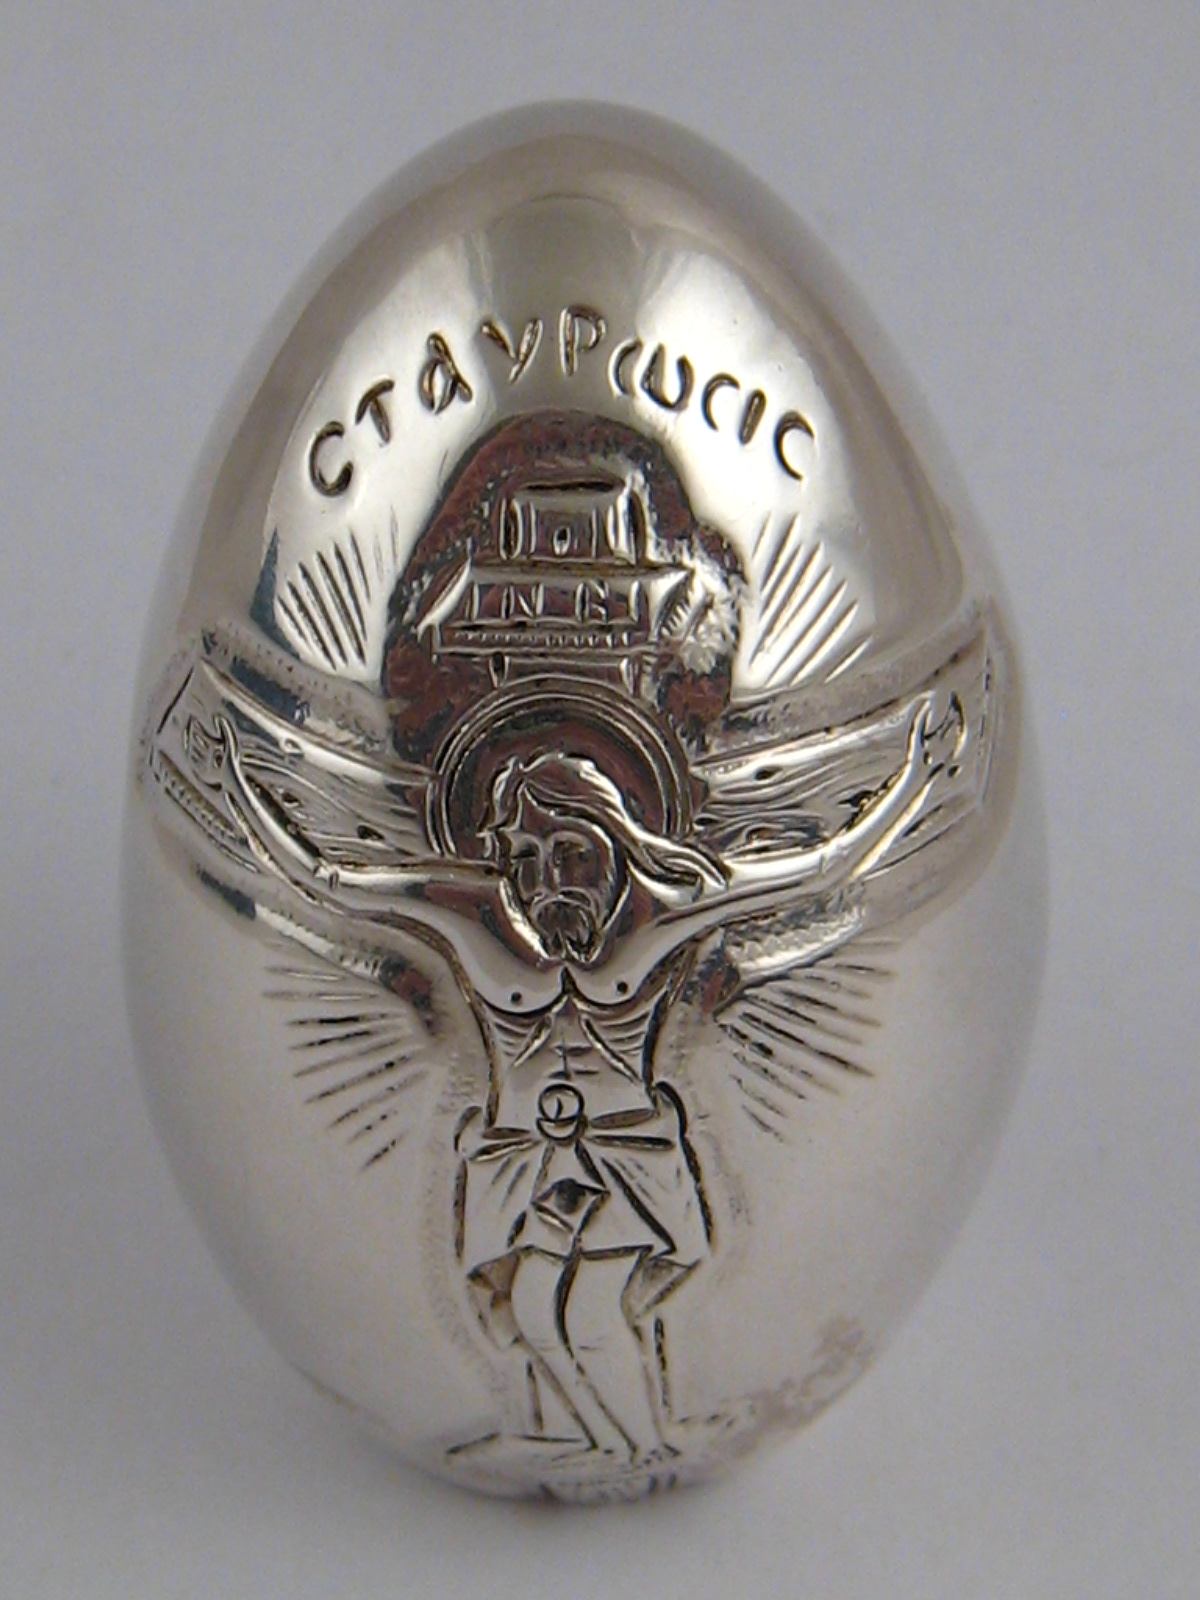 A Russian silver cased Easter egg with embossed figures, marked 925 R. Ht. 6.5cm